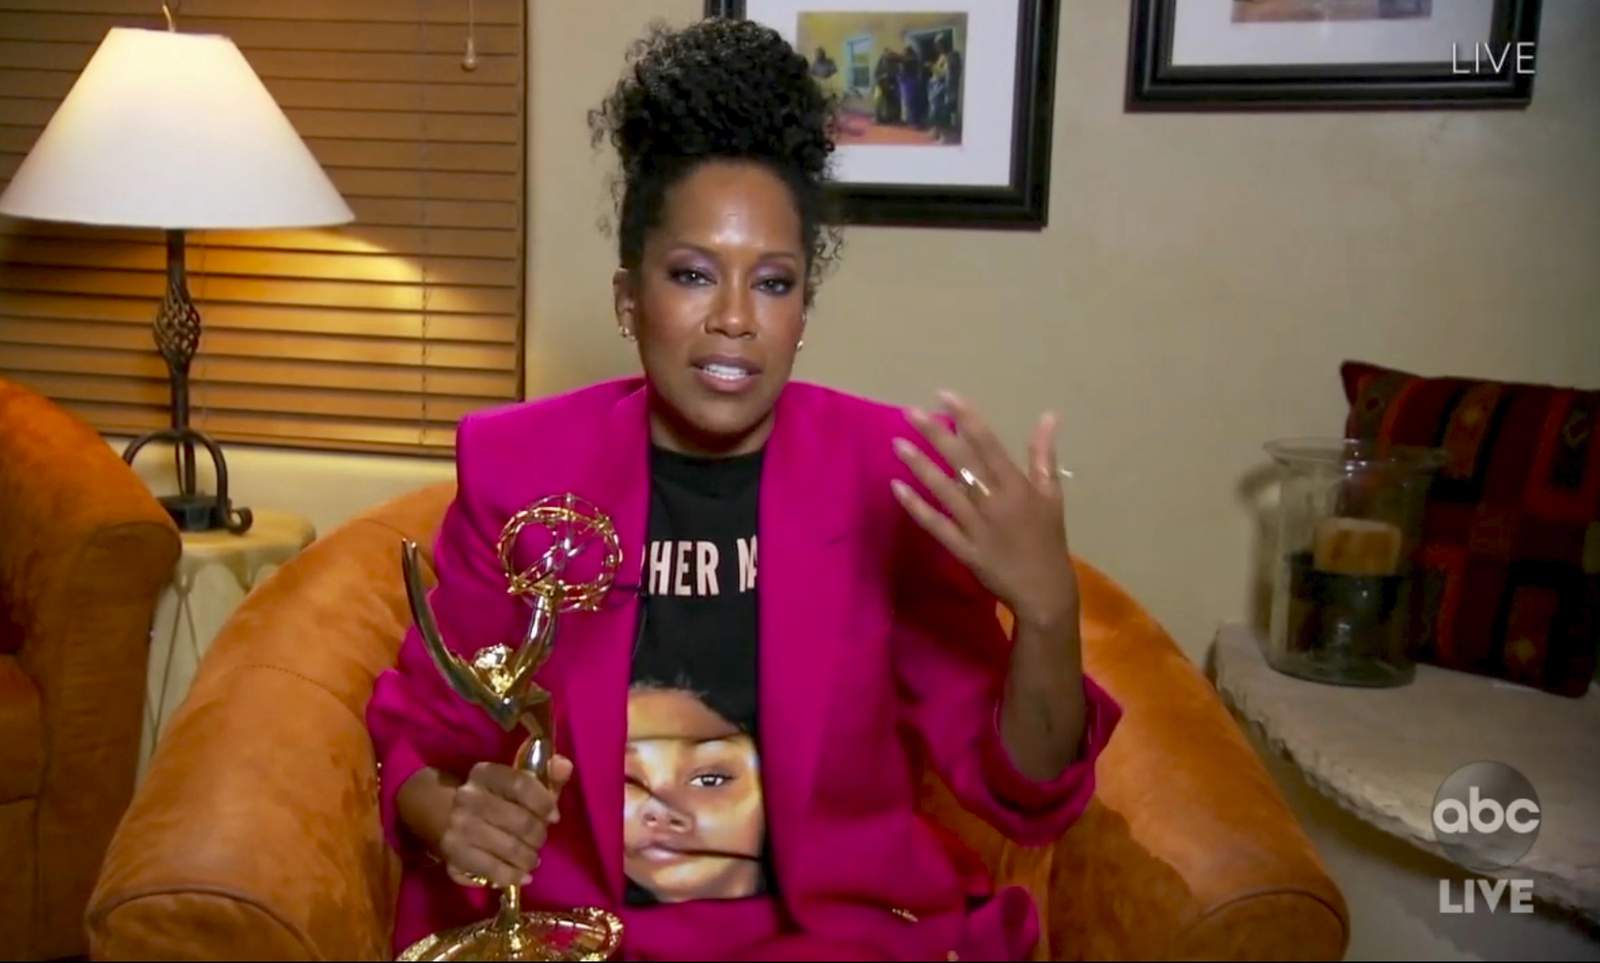 Emmy winners highlight push for social justice